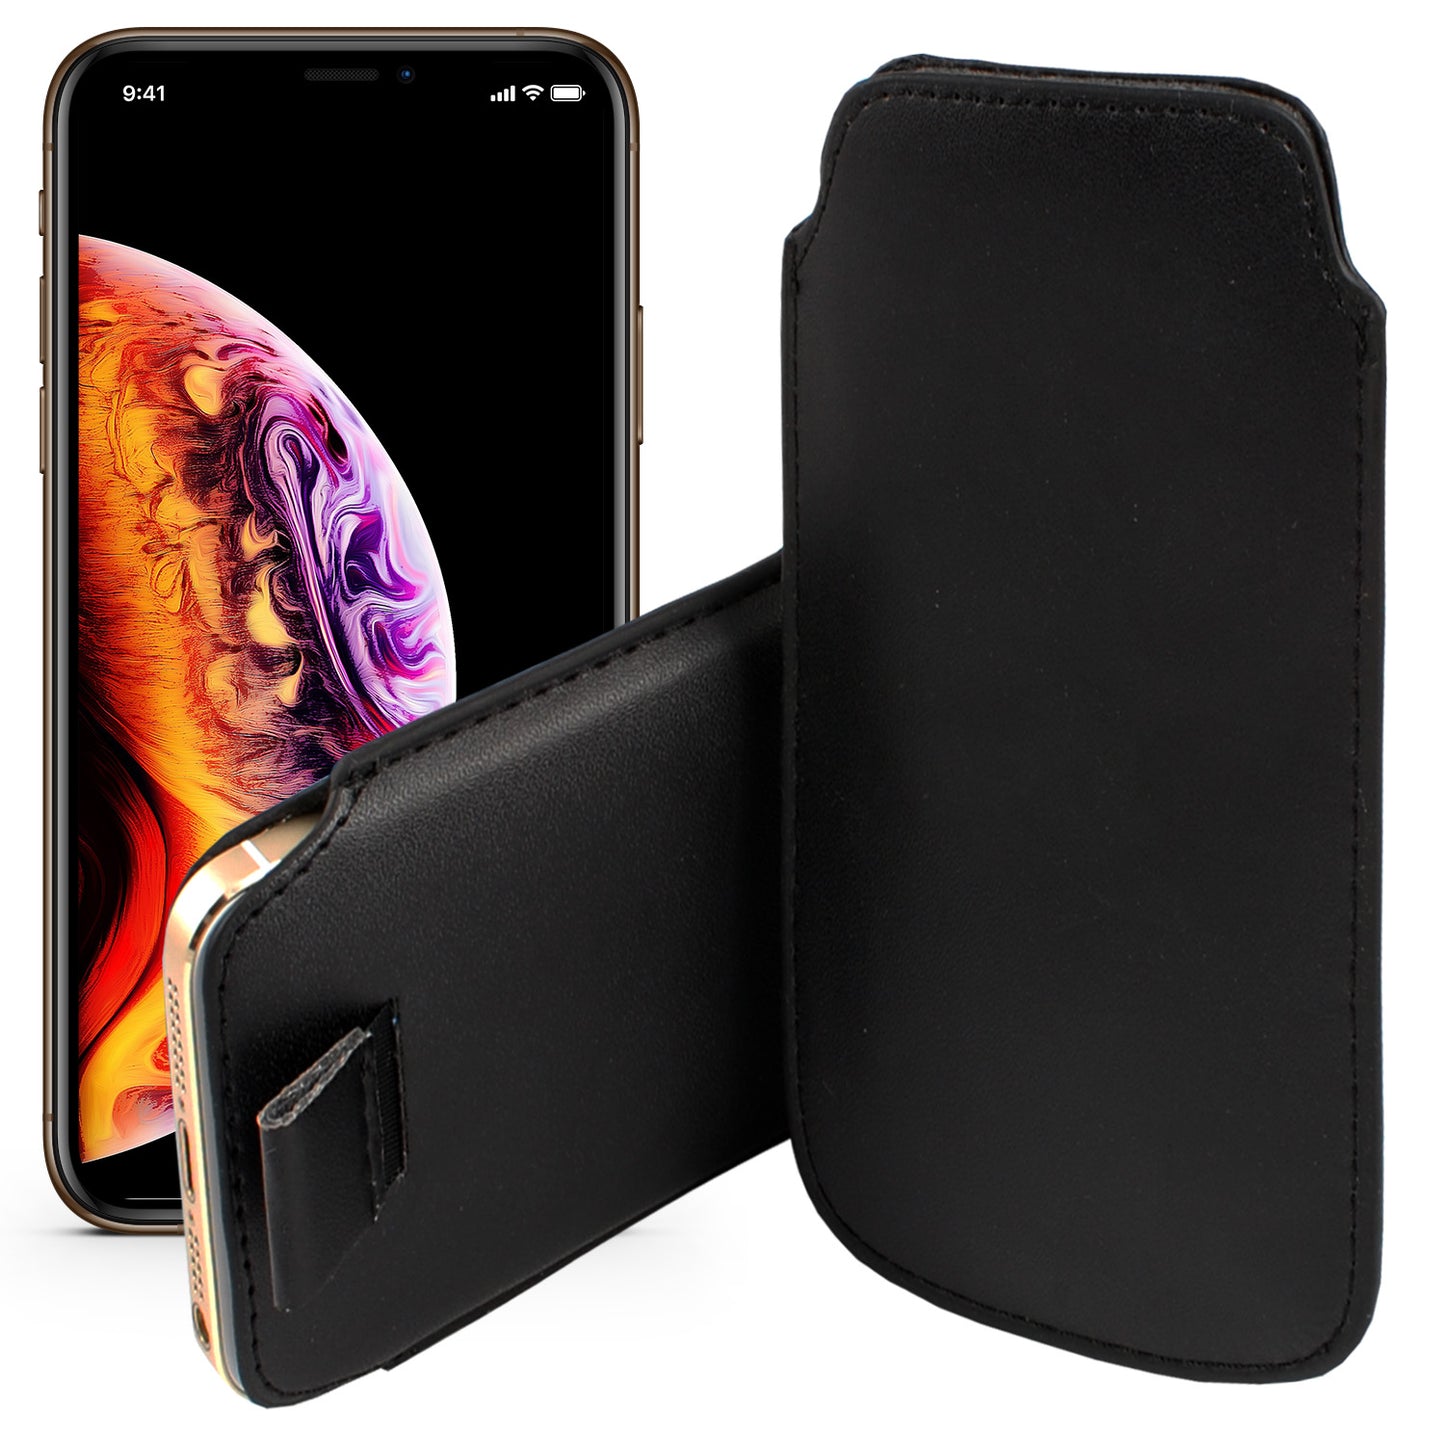 MEZON Apple iPhone 11 Pro Max (6.5") Black Pull Tab Slim Faux Leather Pouch Sleeve Case Wireless Charging Compatible